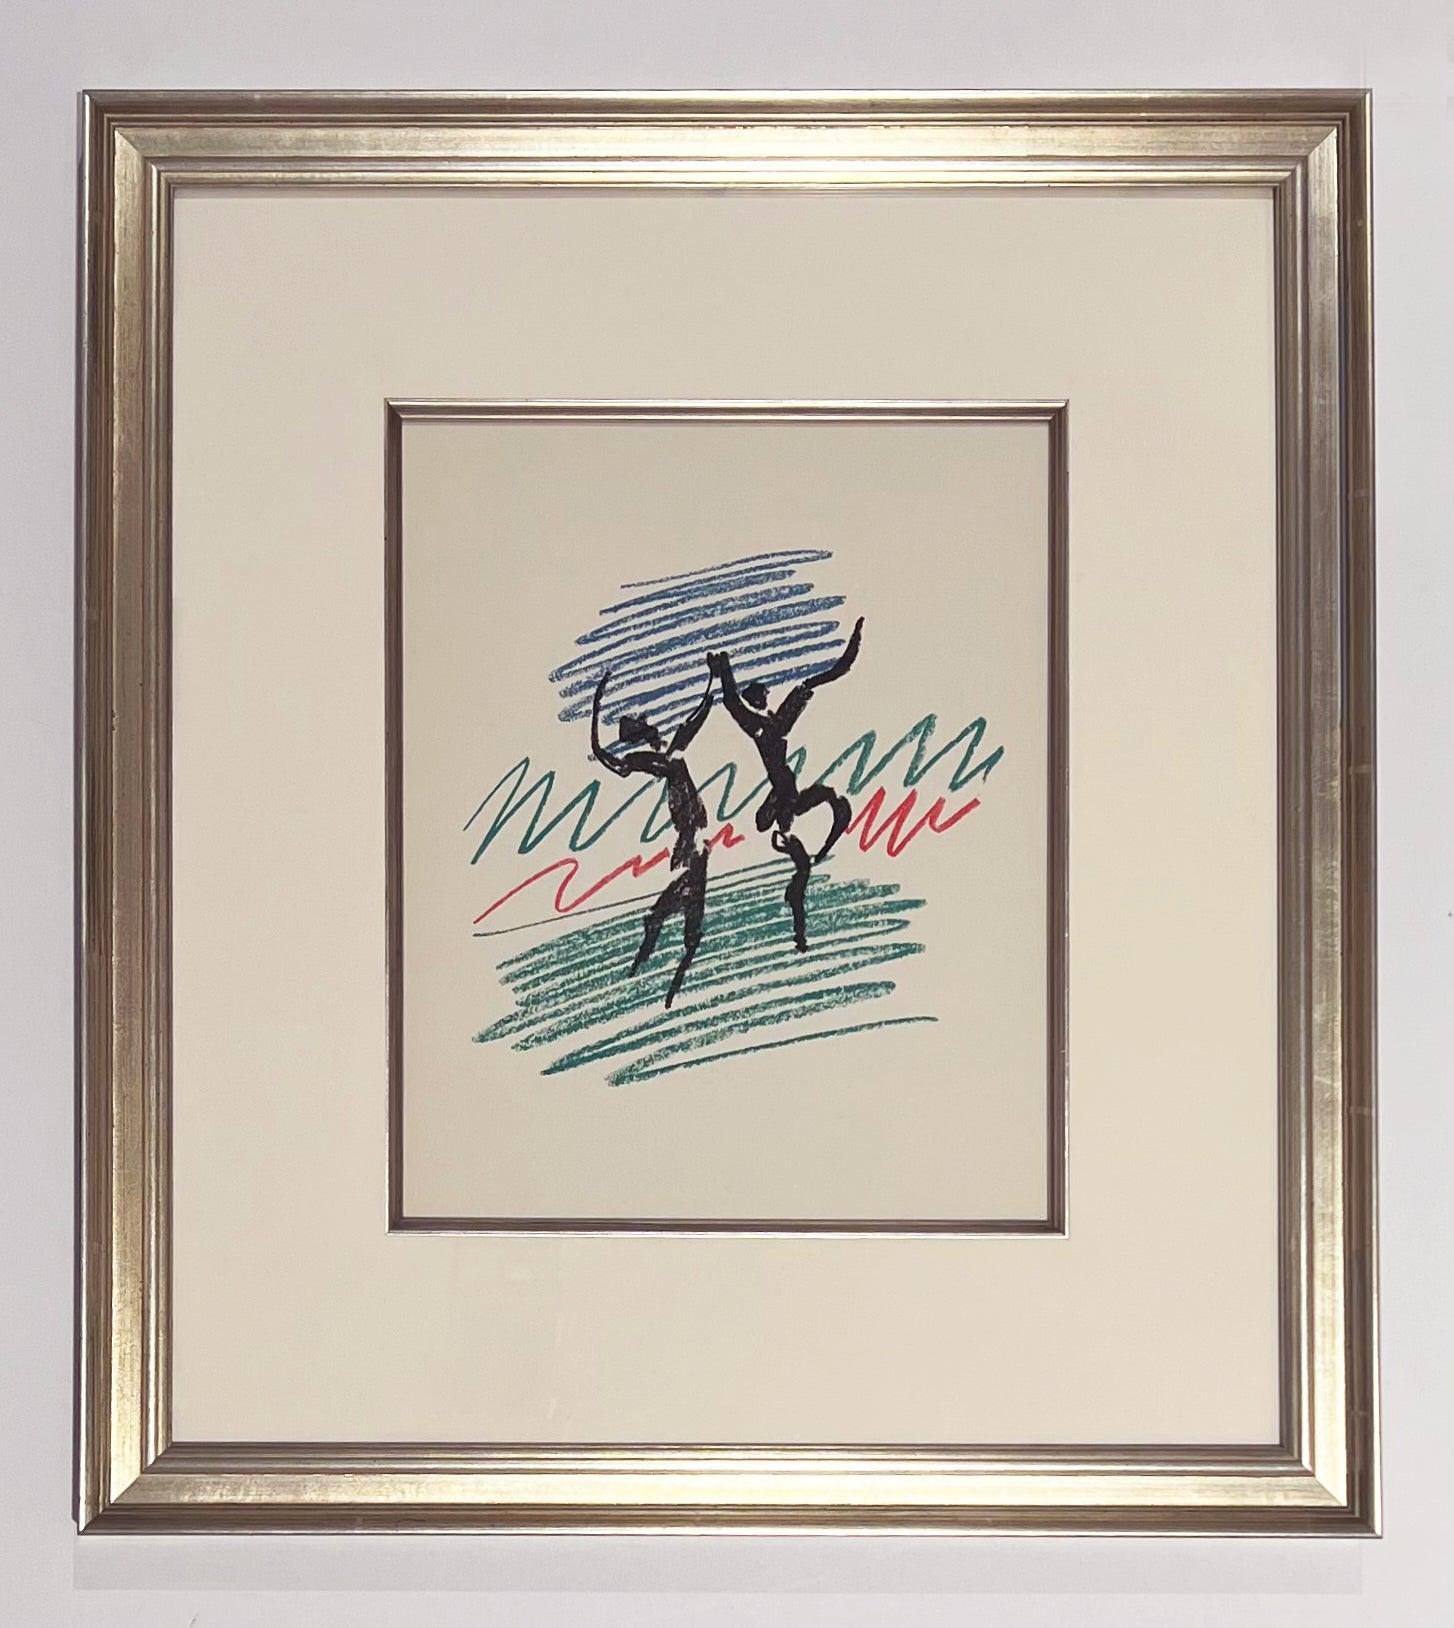 La Danse, frontispiece from Picasso Lithographe III  - Print by Pablo Picasso